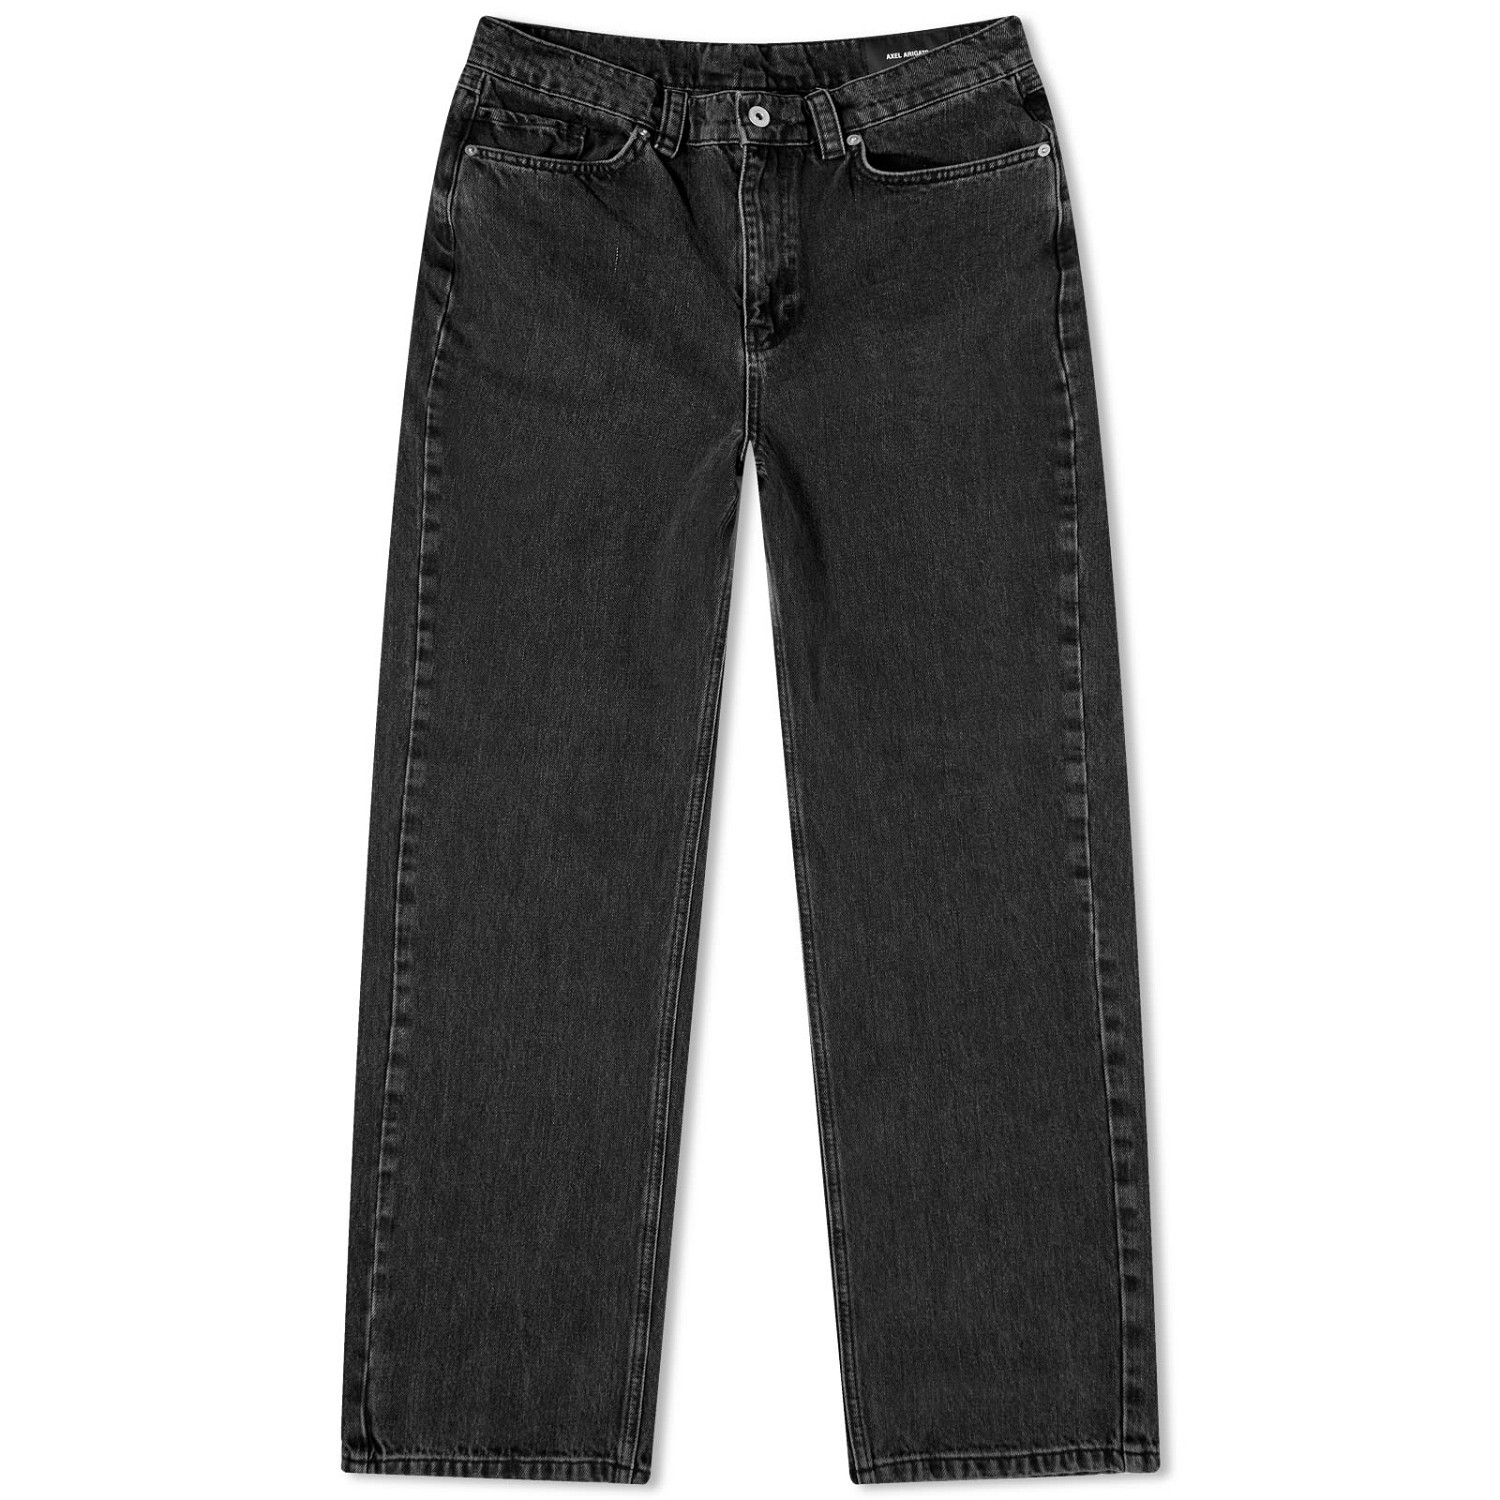 Farmer AXEL ARIGATO Sly Mid-Rise Jeans Fekete | A0909002, 0